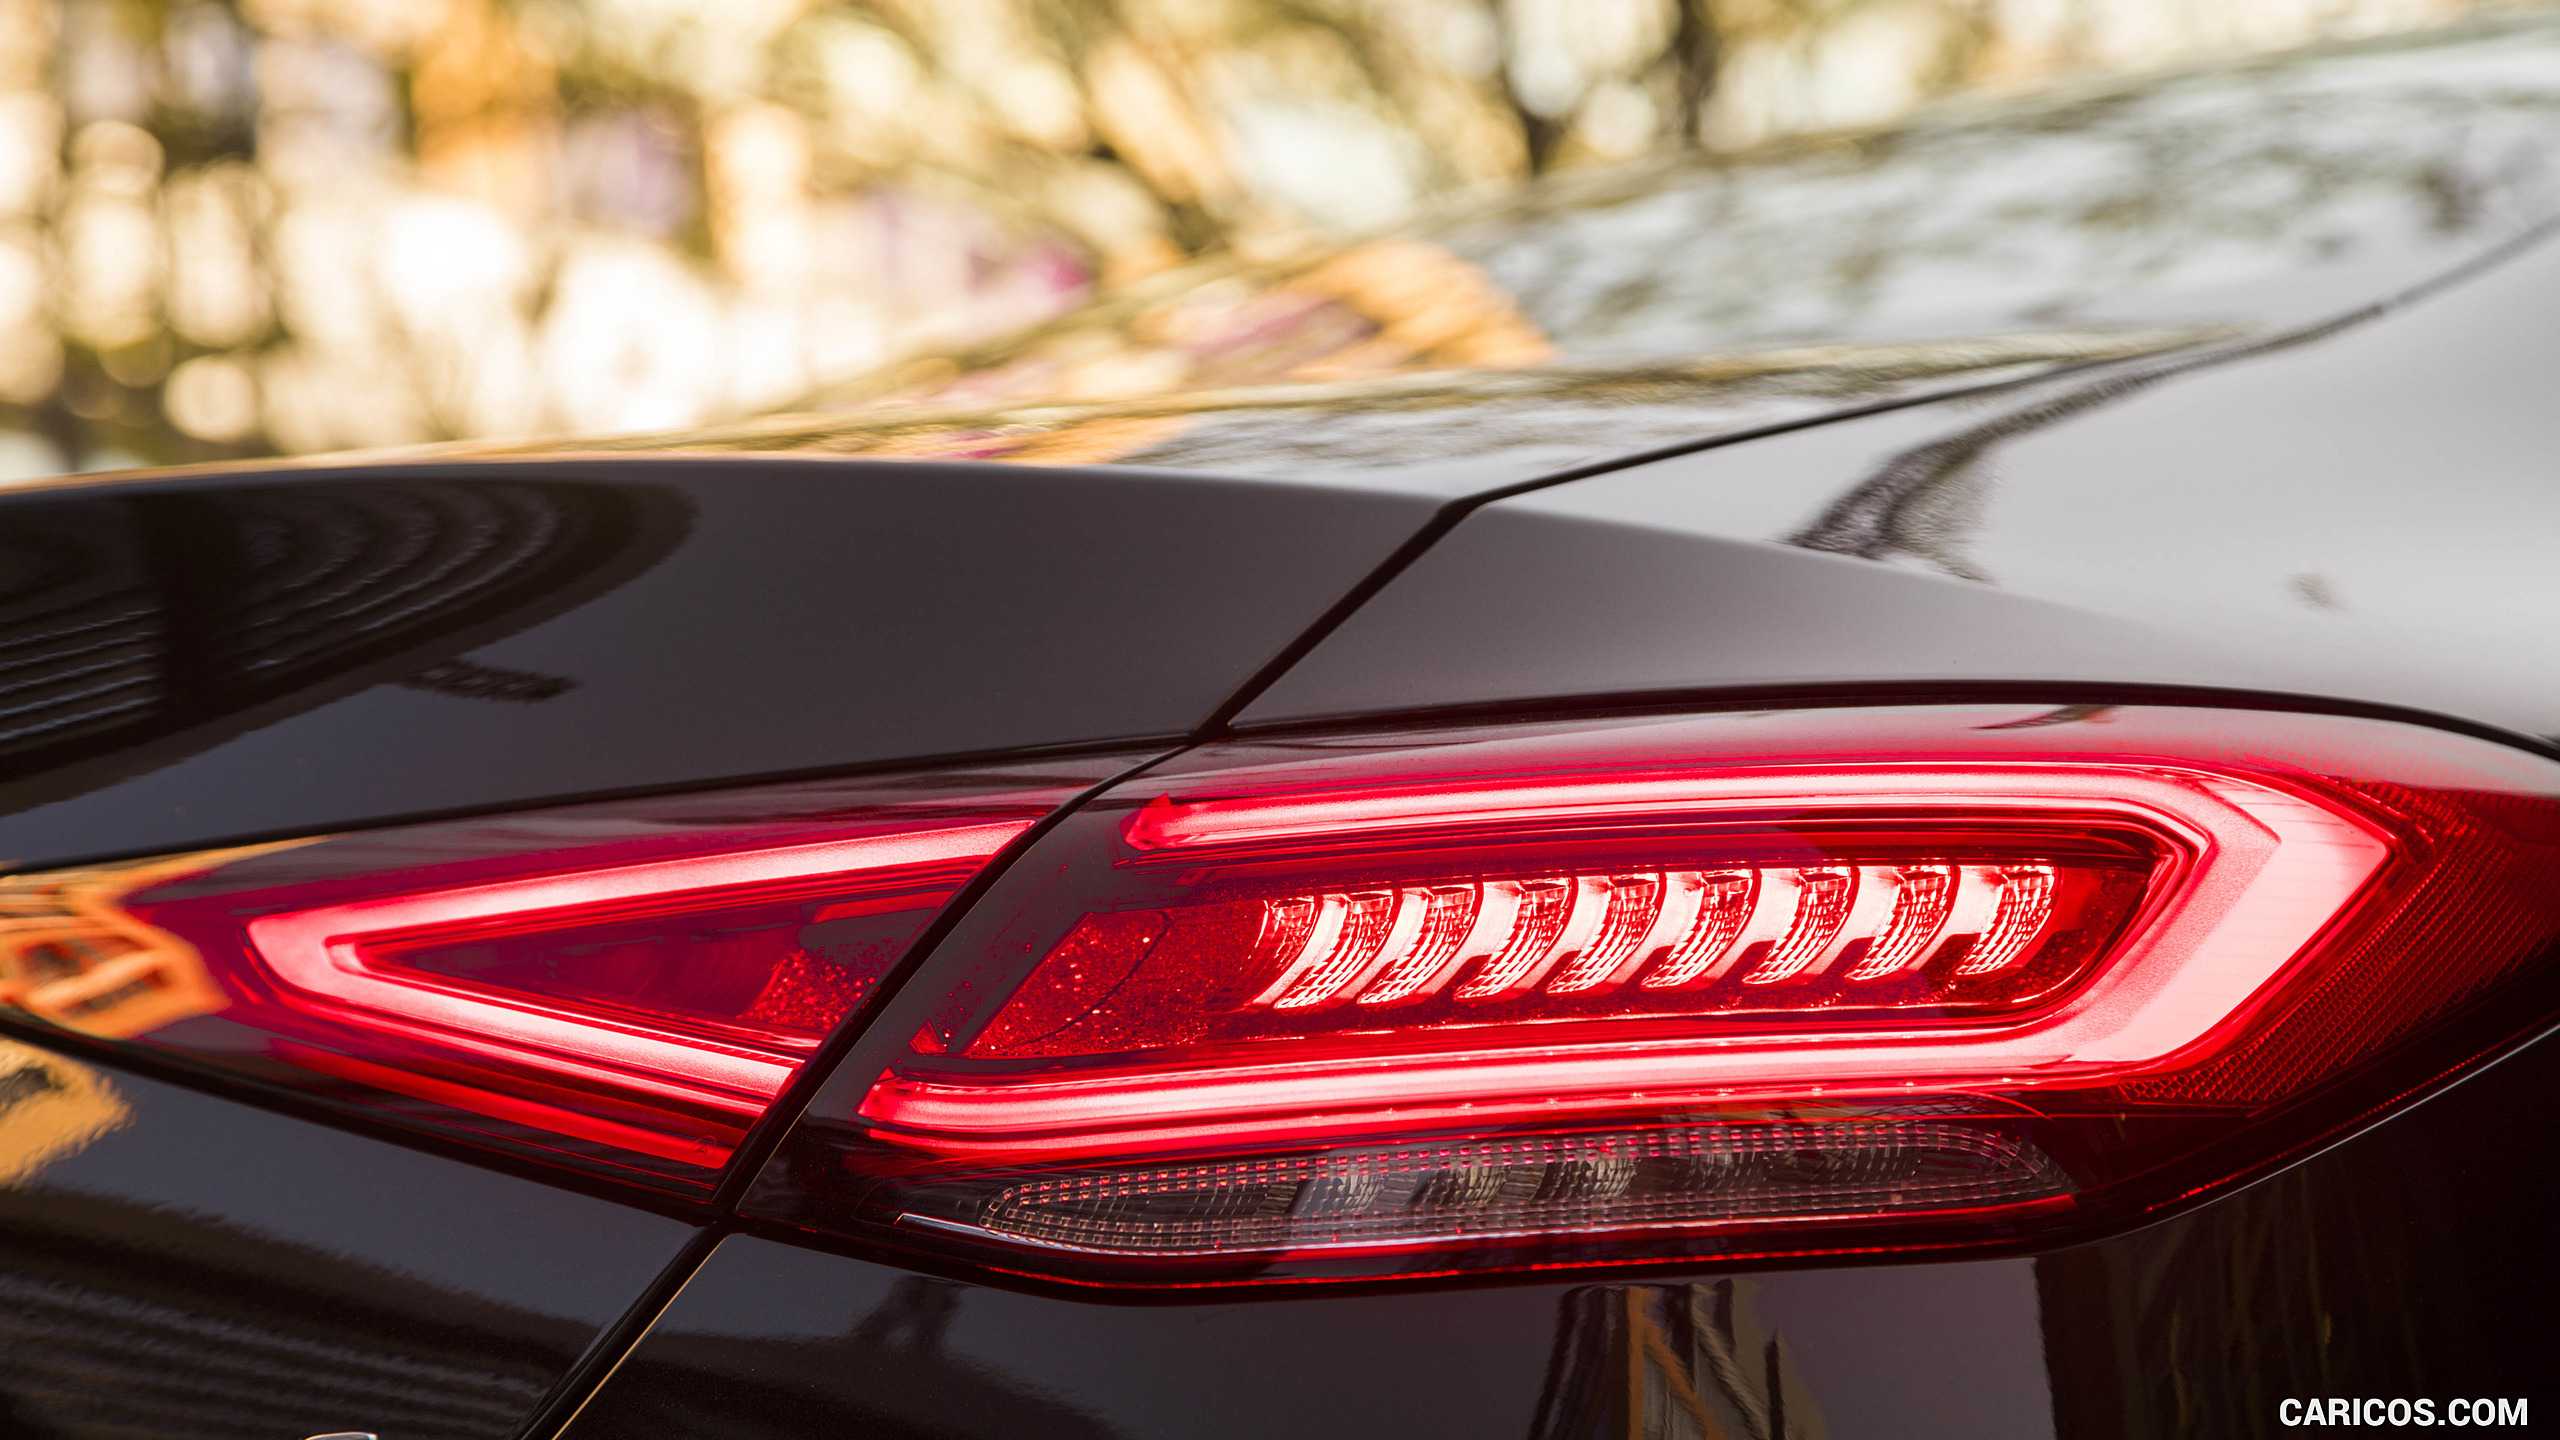 2019 Mercedes-Benz CLS 450 4MATIC (US-Spec) - Tail Light, #176 of 231